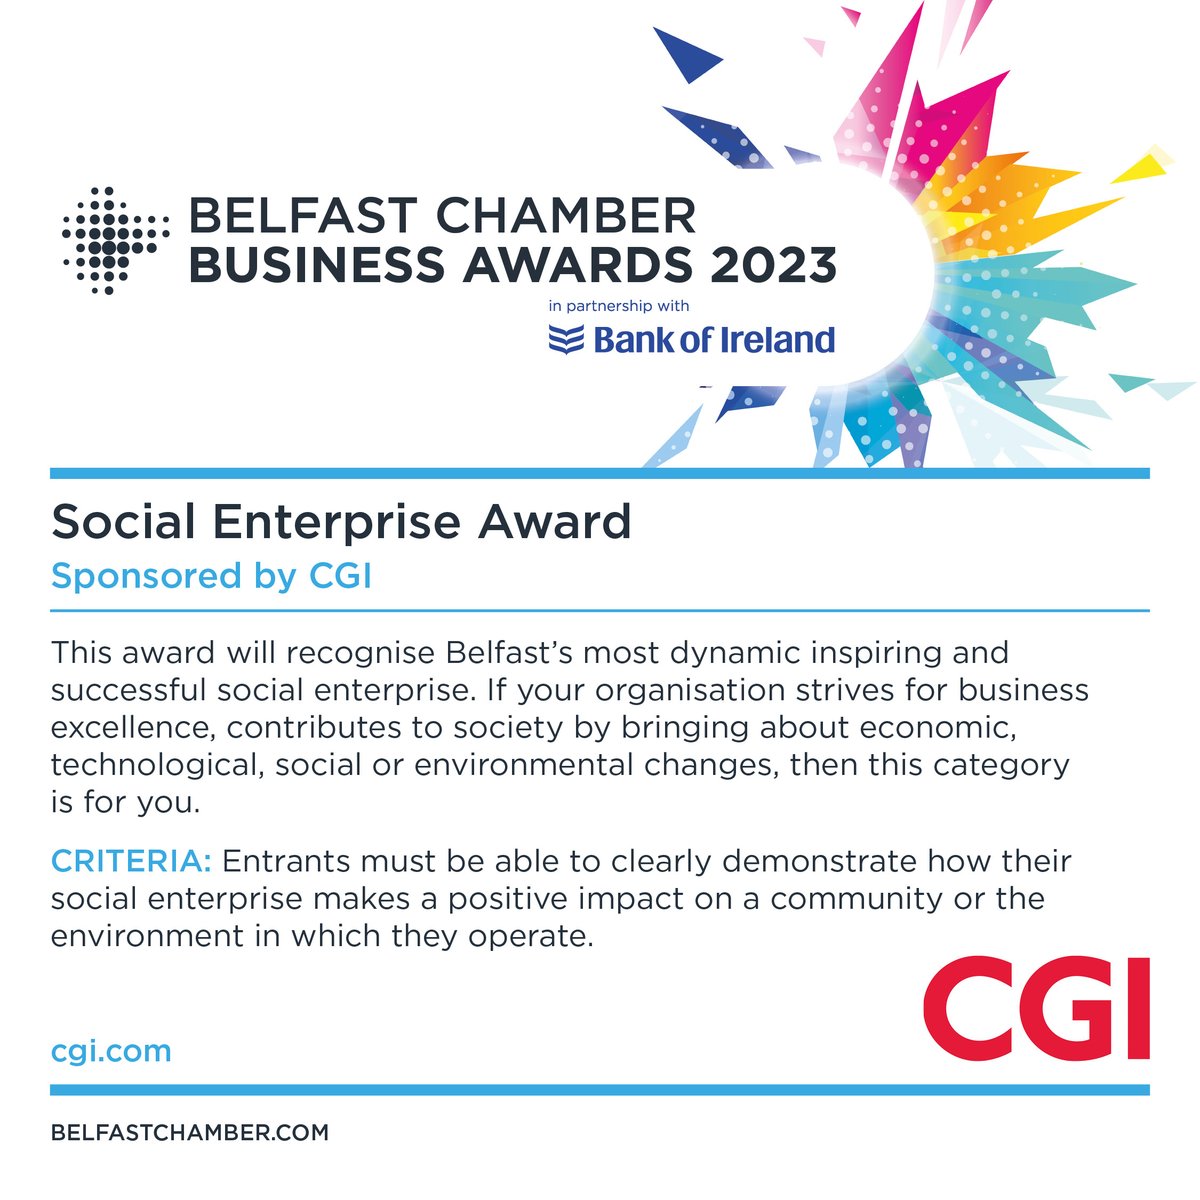 REMINDER: The #BelfastChamberBusinessAwards close this week for entries! 

Enter the Social Enterprise Category now and demonstrate how your SE makes a positive impact in the local community/environment. 

To apply, visit belfastchamber.com/categories/ 

Deadline: Friday 8th September